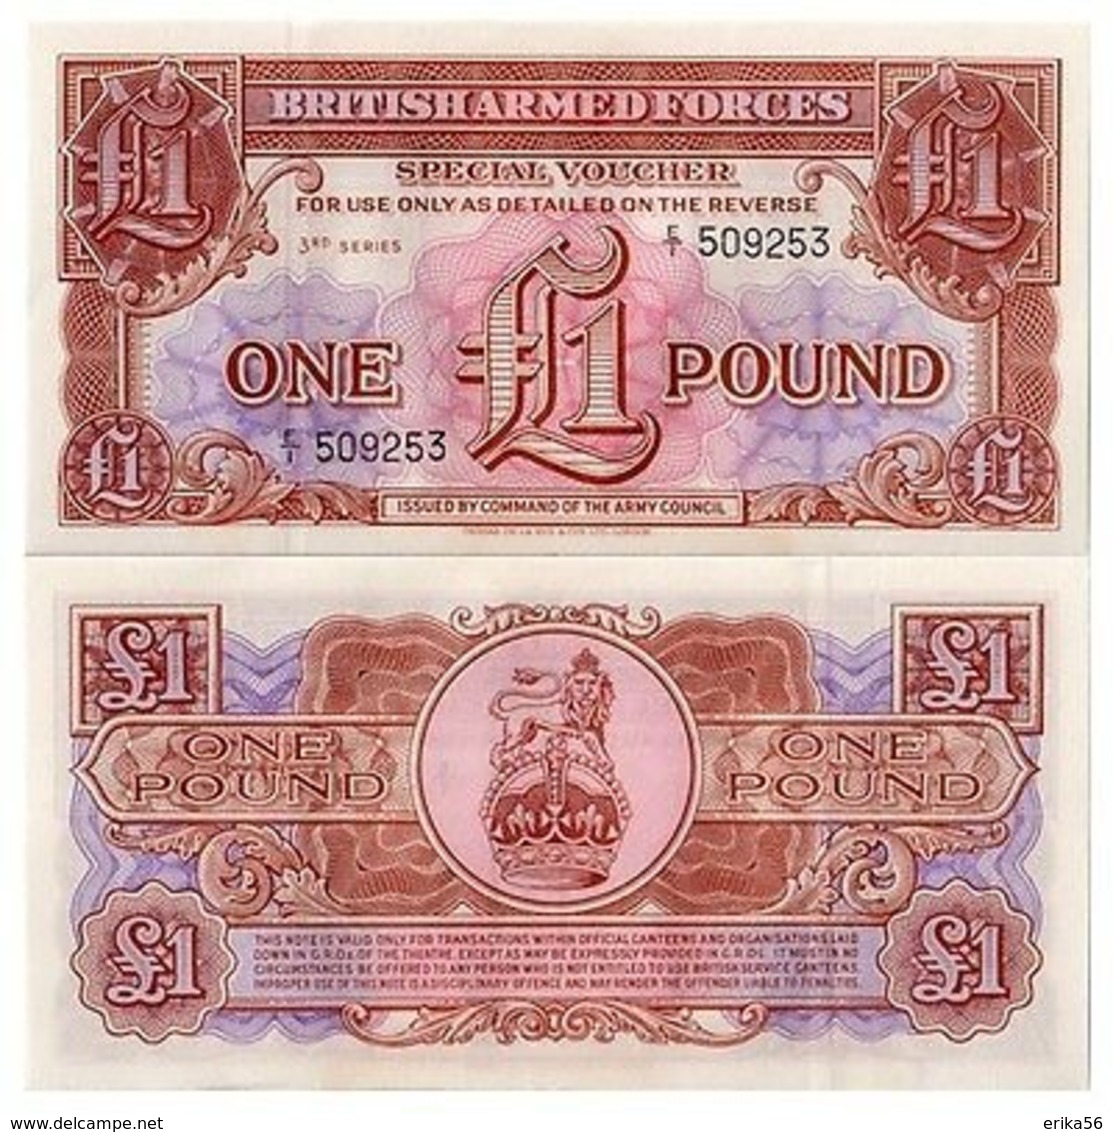 Billet British Armed Forces 1 Pound - 3 Rd Series - British Armed Forces & Special Vouchers